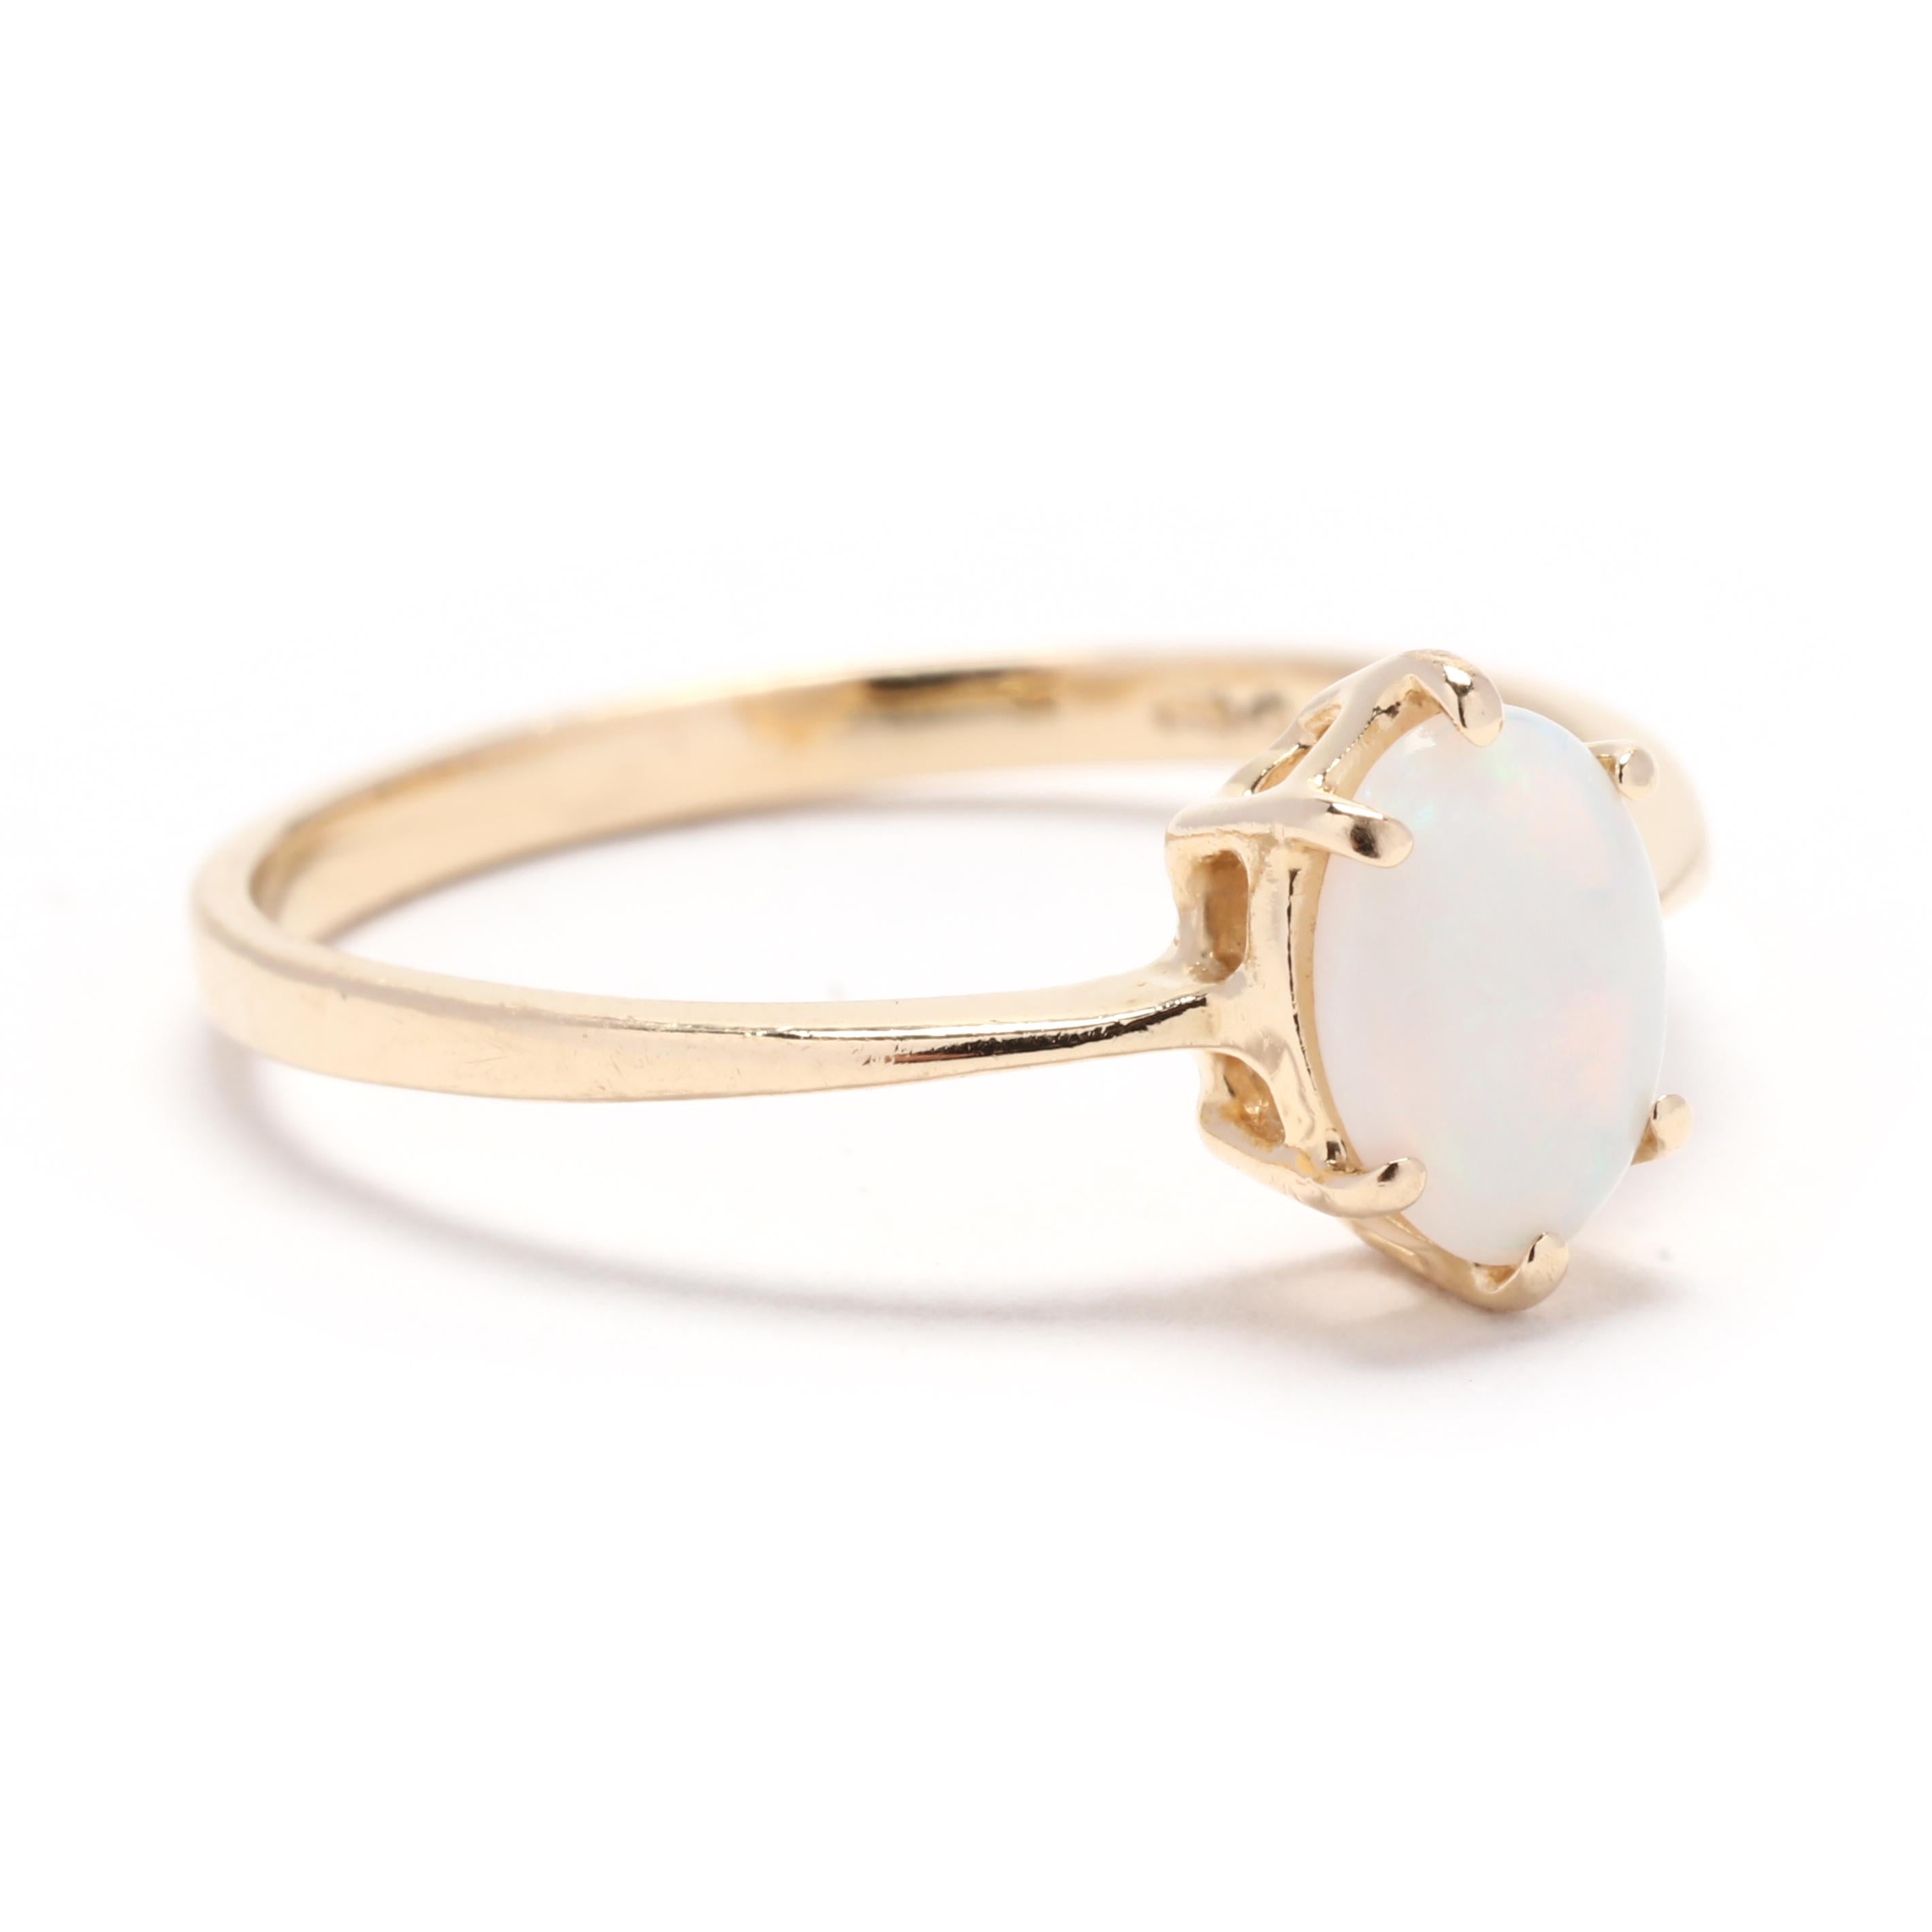 This stunning solitaire oval opal ring is the perfect accessory for any occasion. Crafted in solid 14K yellow gold, this ring is a timeless piece that will never go out of style. The centerpiece of this ring is a beautiful oval opal gemstone, known